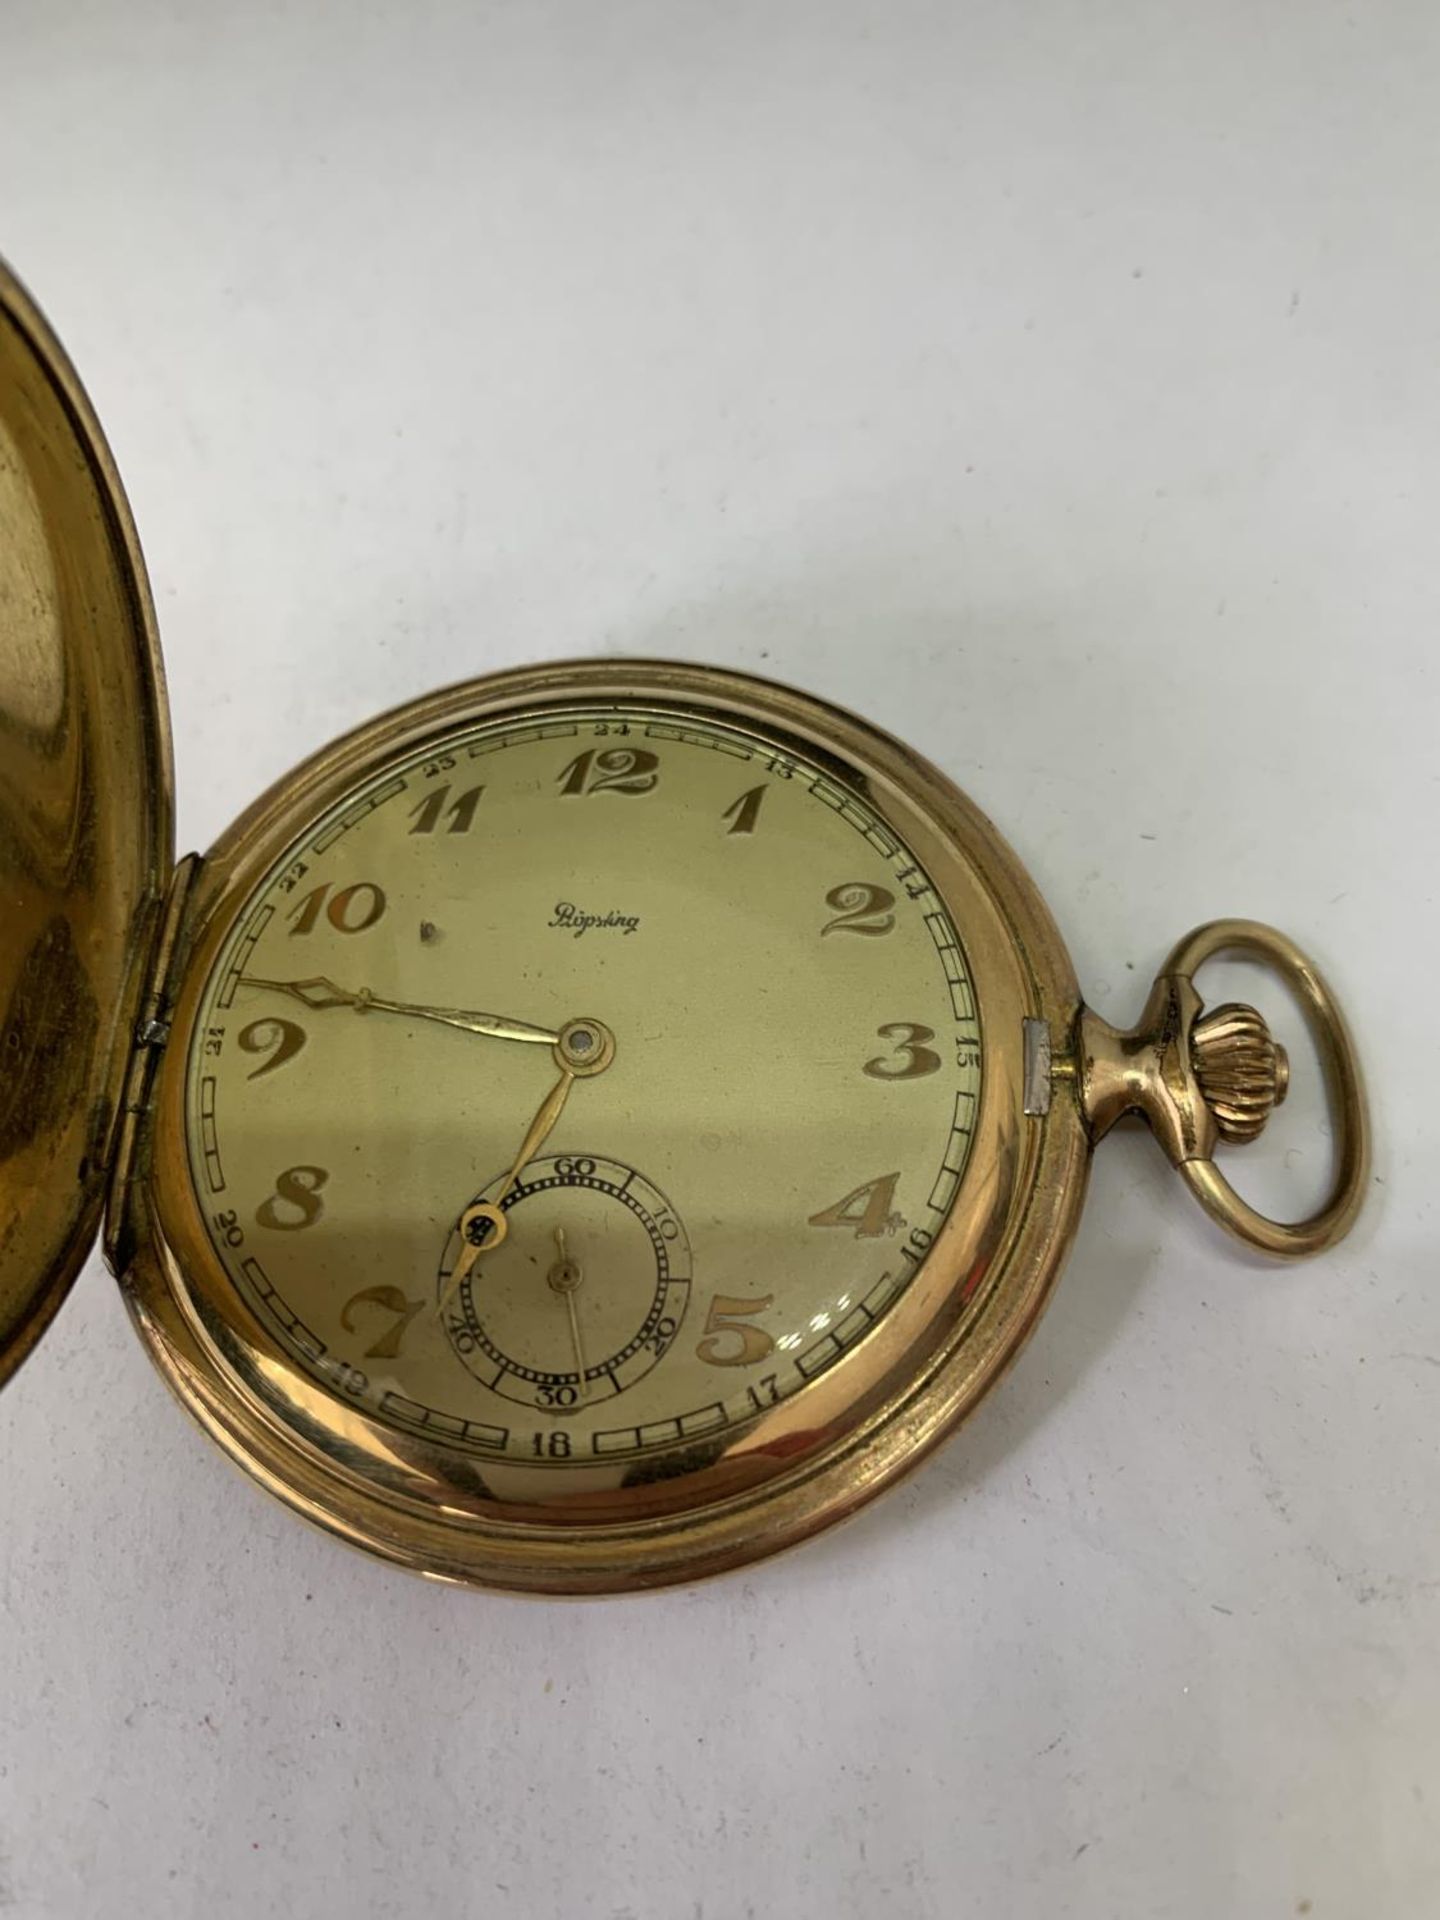 A GERMAN GOLD PLATED POCKET WATCH SEEN WORKING BUT NO WARRANTY - Image 2 of 3